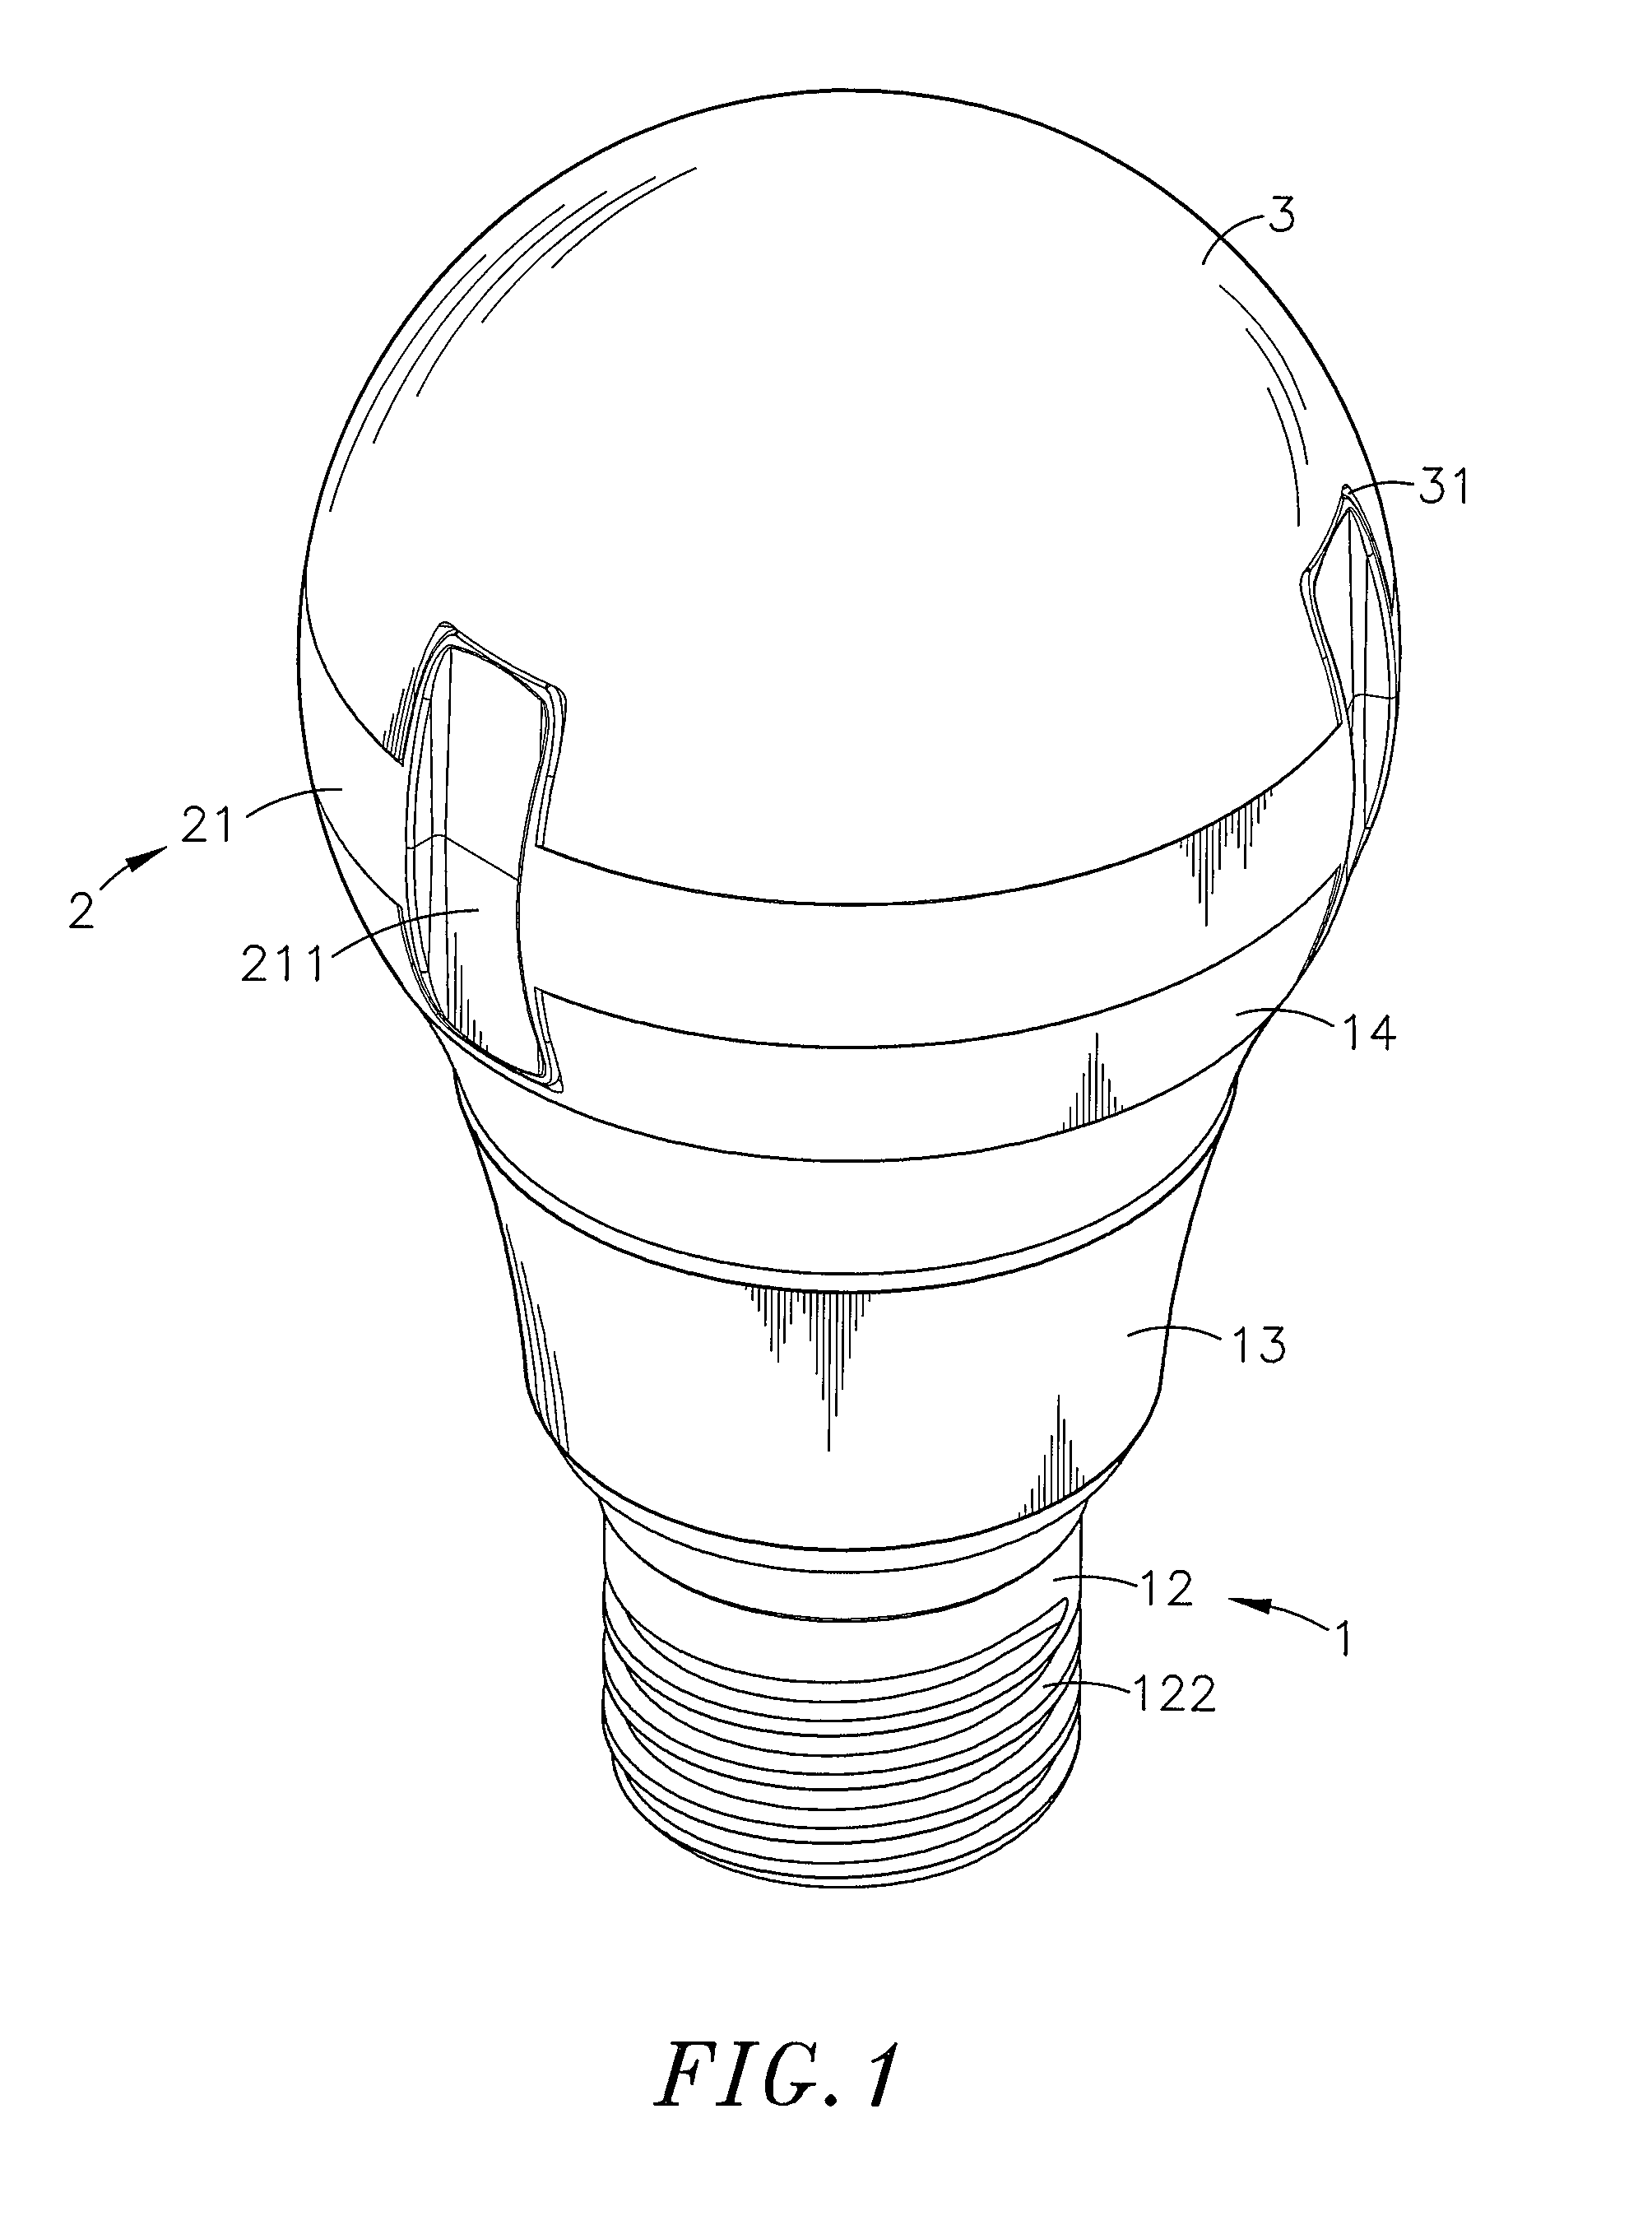 Light bulb with upward and downward facing LEDs having heat dissipation